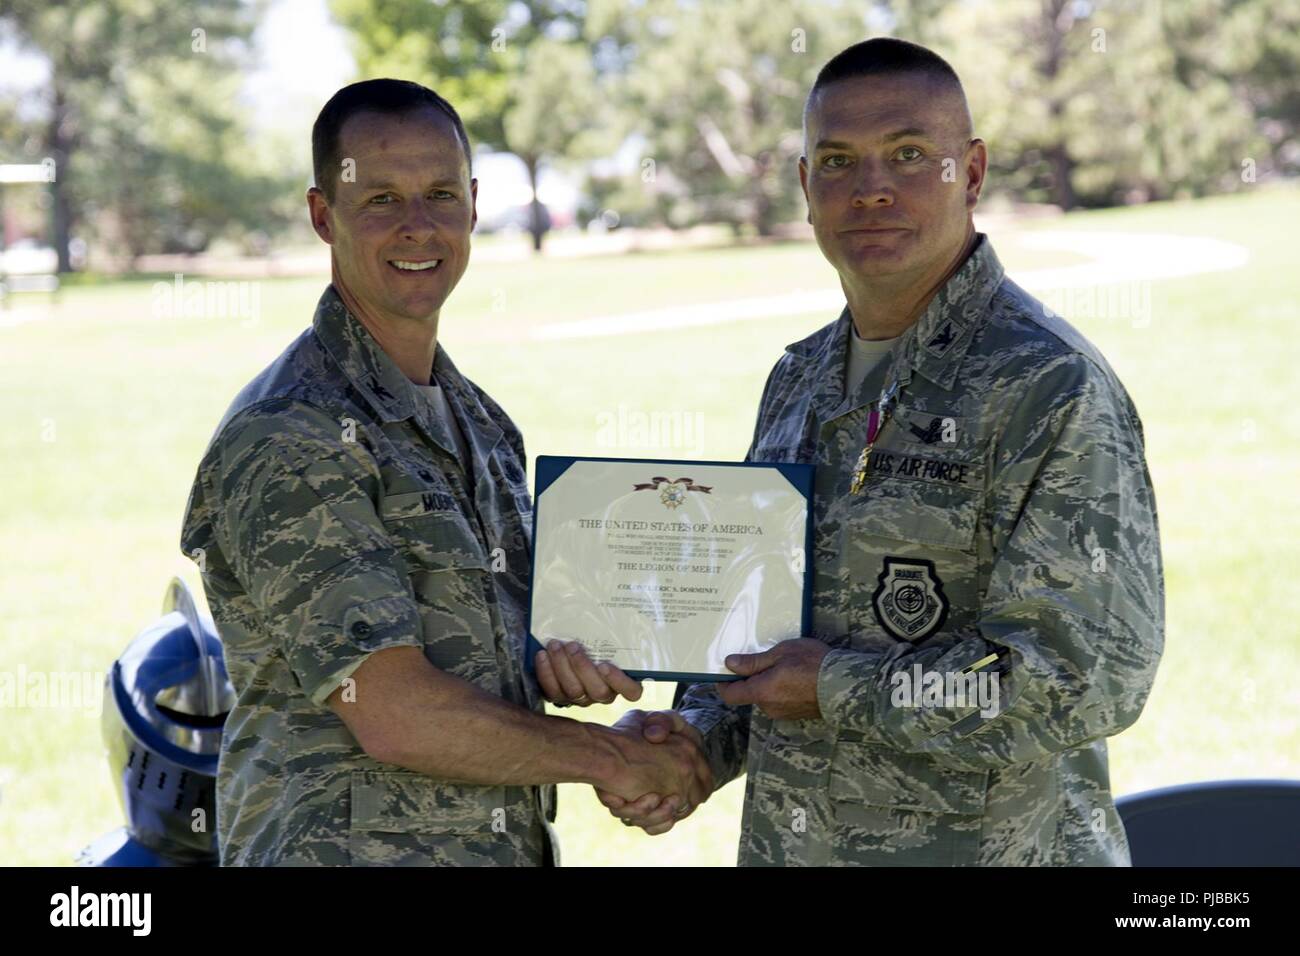 PETERSON AIR FORCE BASE, Colo. – Col. Todd Moore, 21st Space Wing commander, presents the Legion of Merit to Col. Eric Dorminey, 21st Space Wing outgoing vice commander, at a going away barbecue at Capt. Lyon Memorial Park at Peterson Air Force Base, Colorado, July 2, 2018. Dorminey became 21 SW vice commander in April, 2015, and spent nearly 39 months in the position. Stock Photo